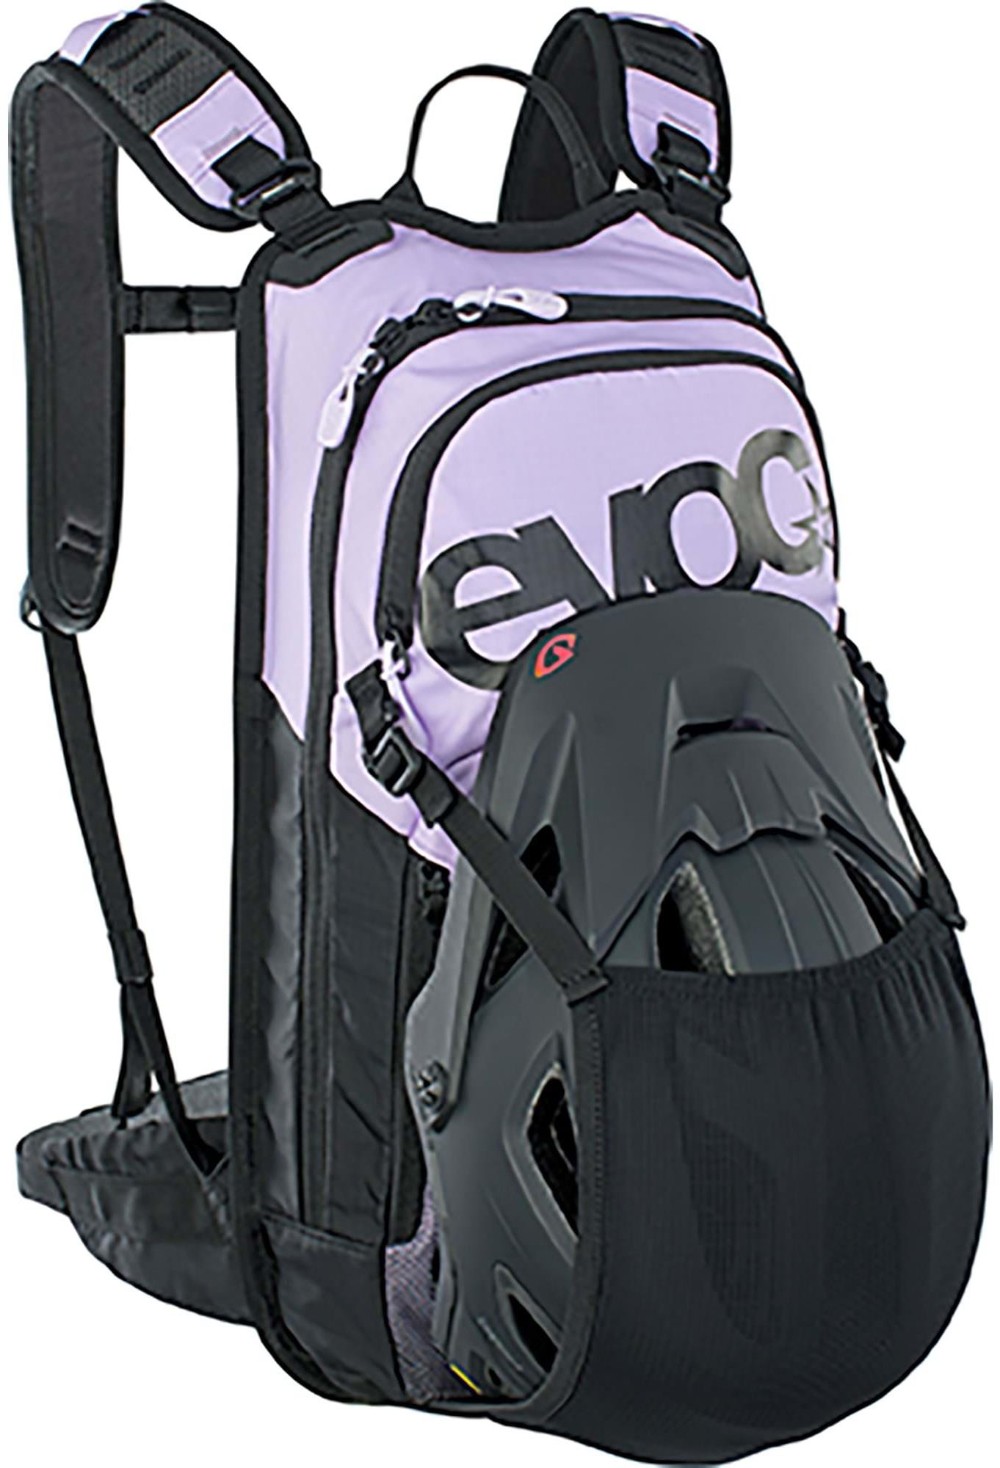 Stage 6L Performance Backpack image 2